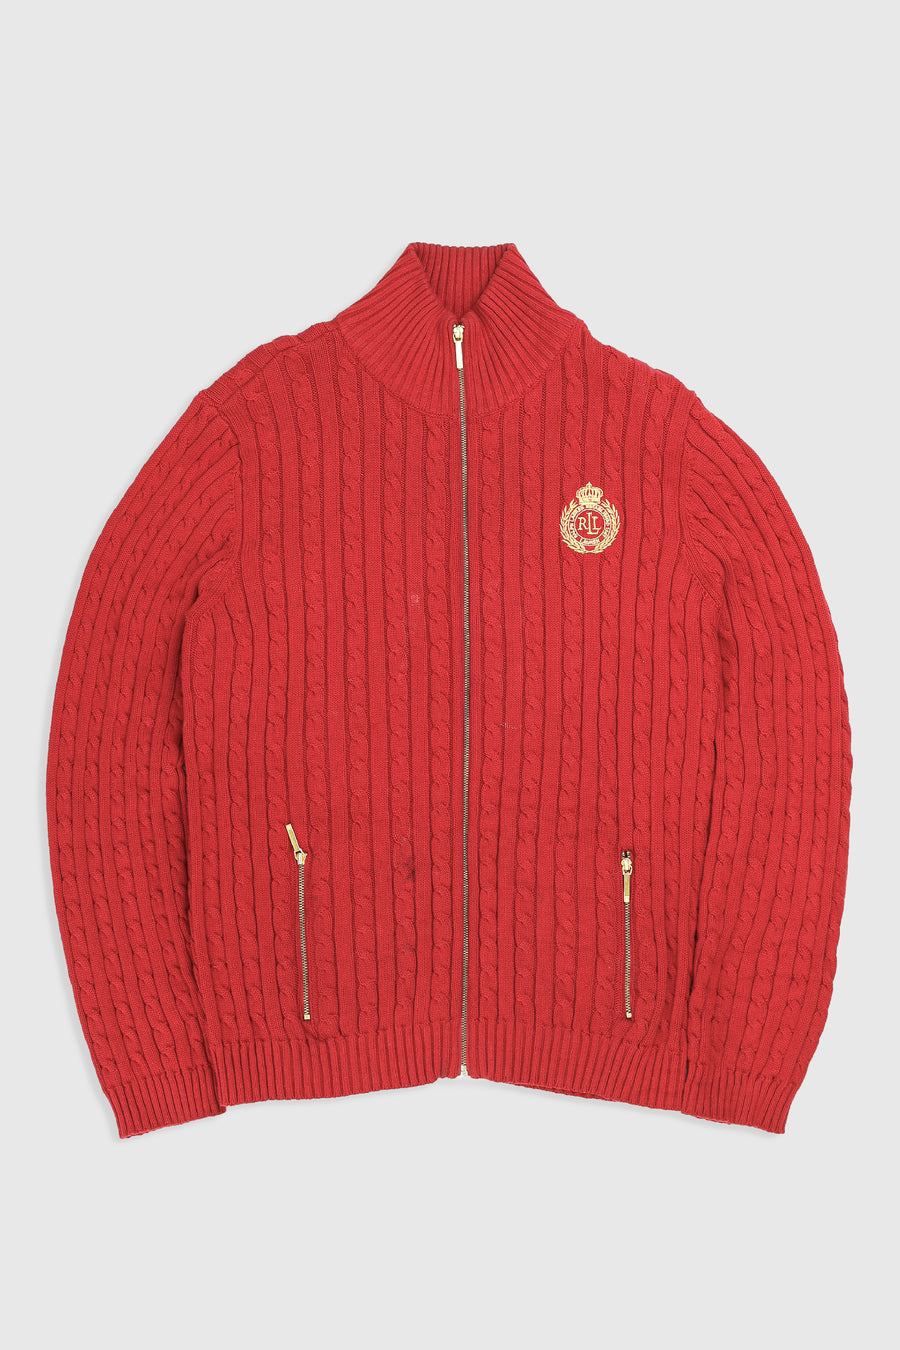 Vintage Polo Knit Zip Sweater